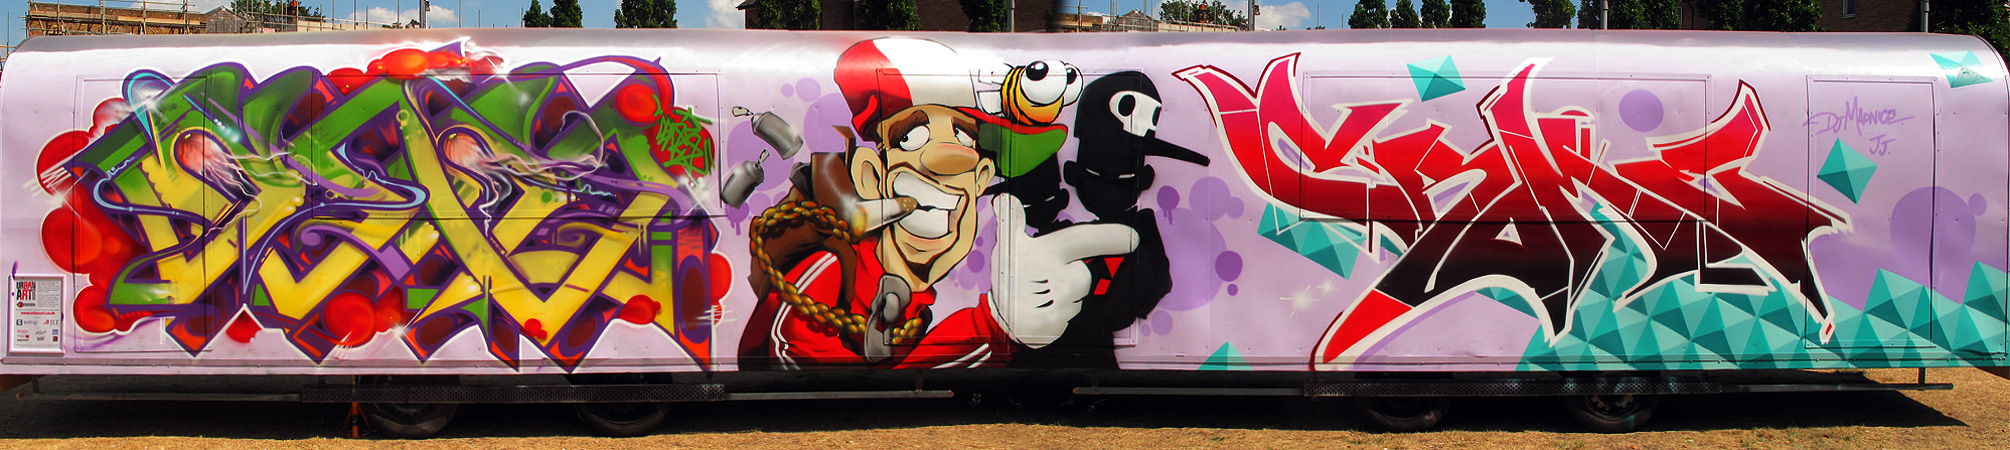 Cenz - Cheo - Crome - urban at 2013